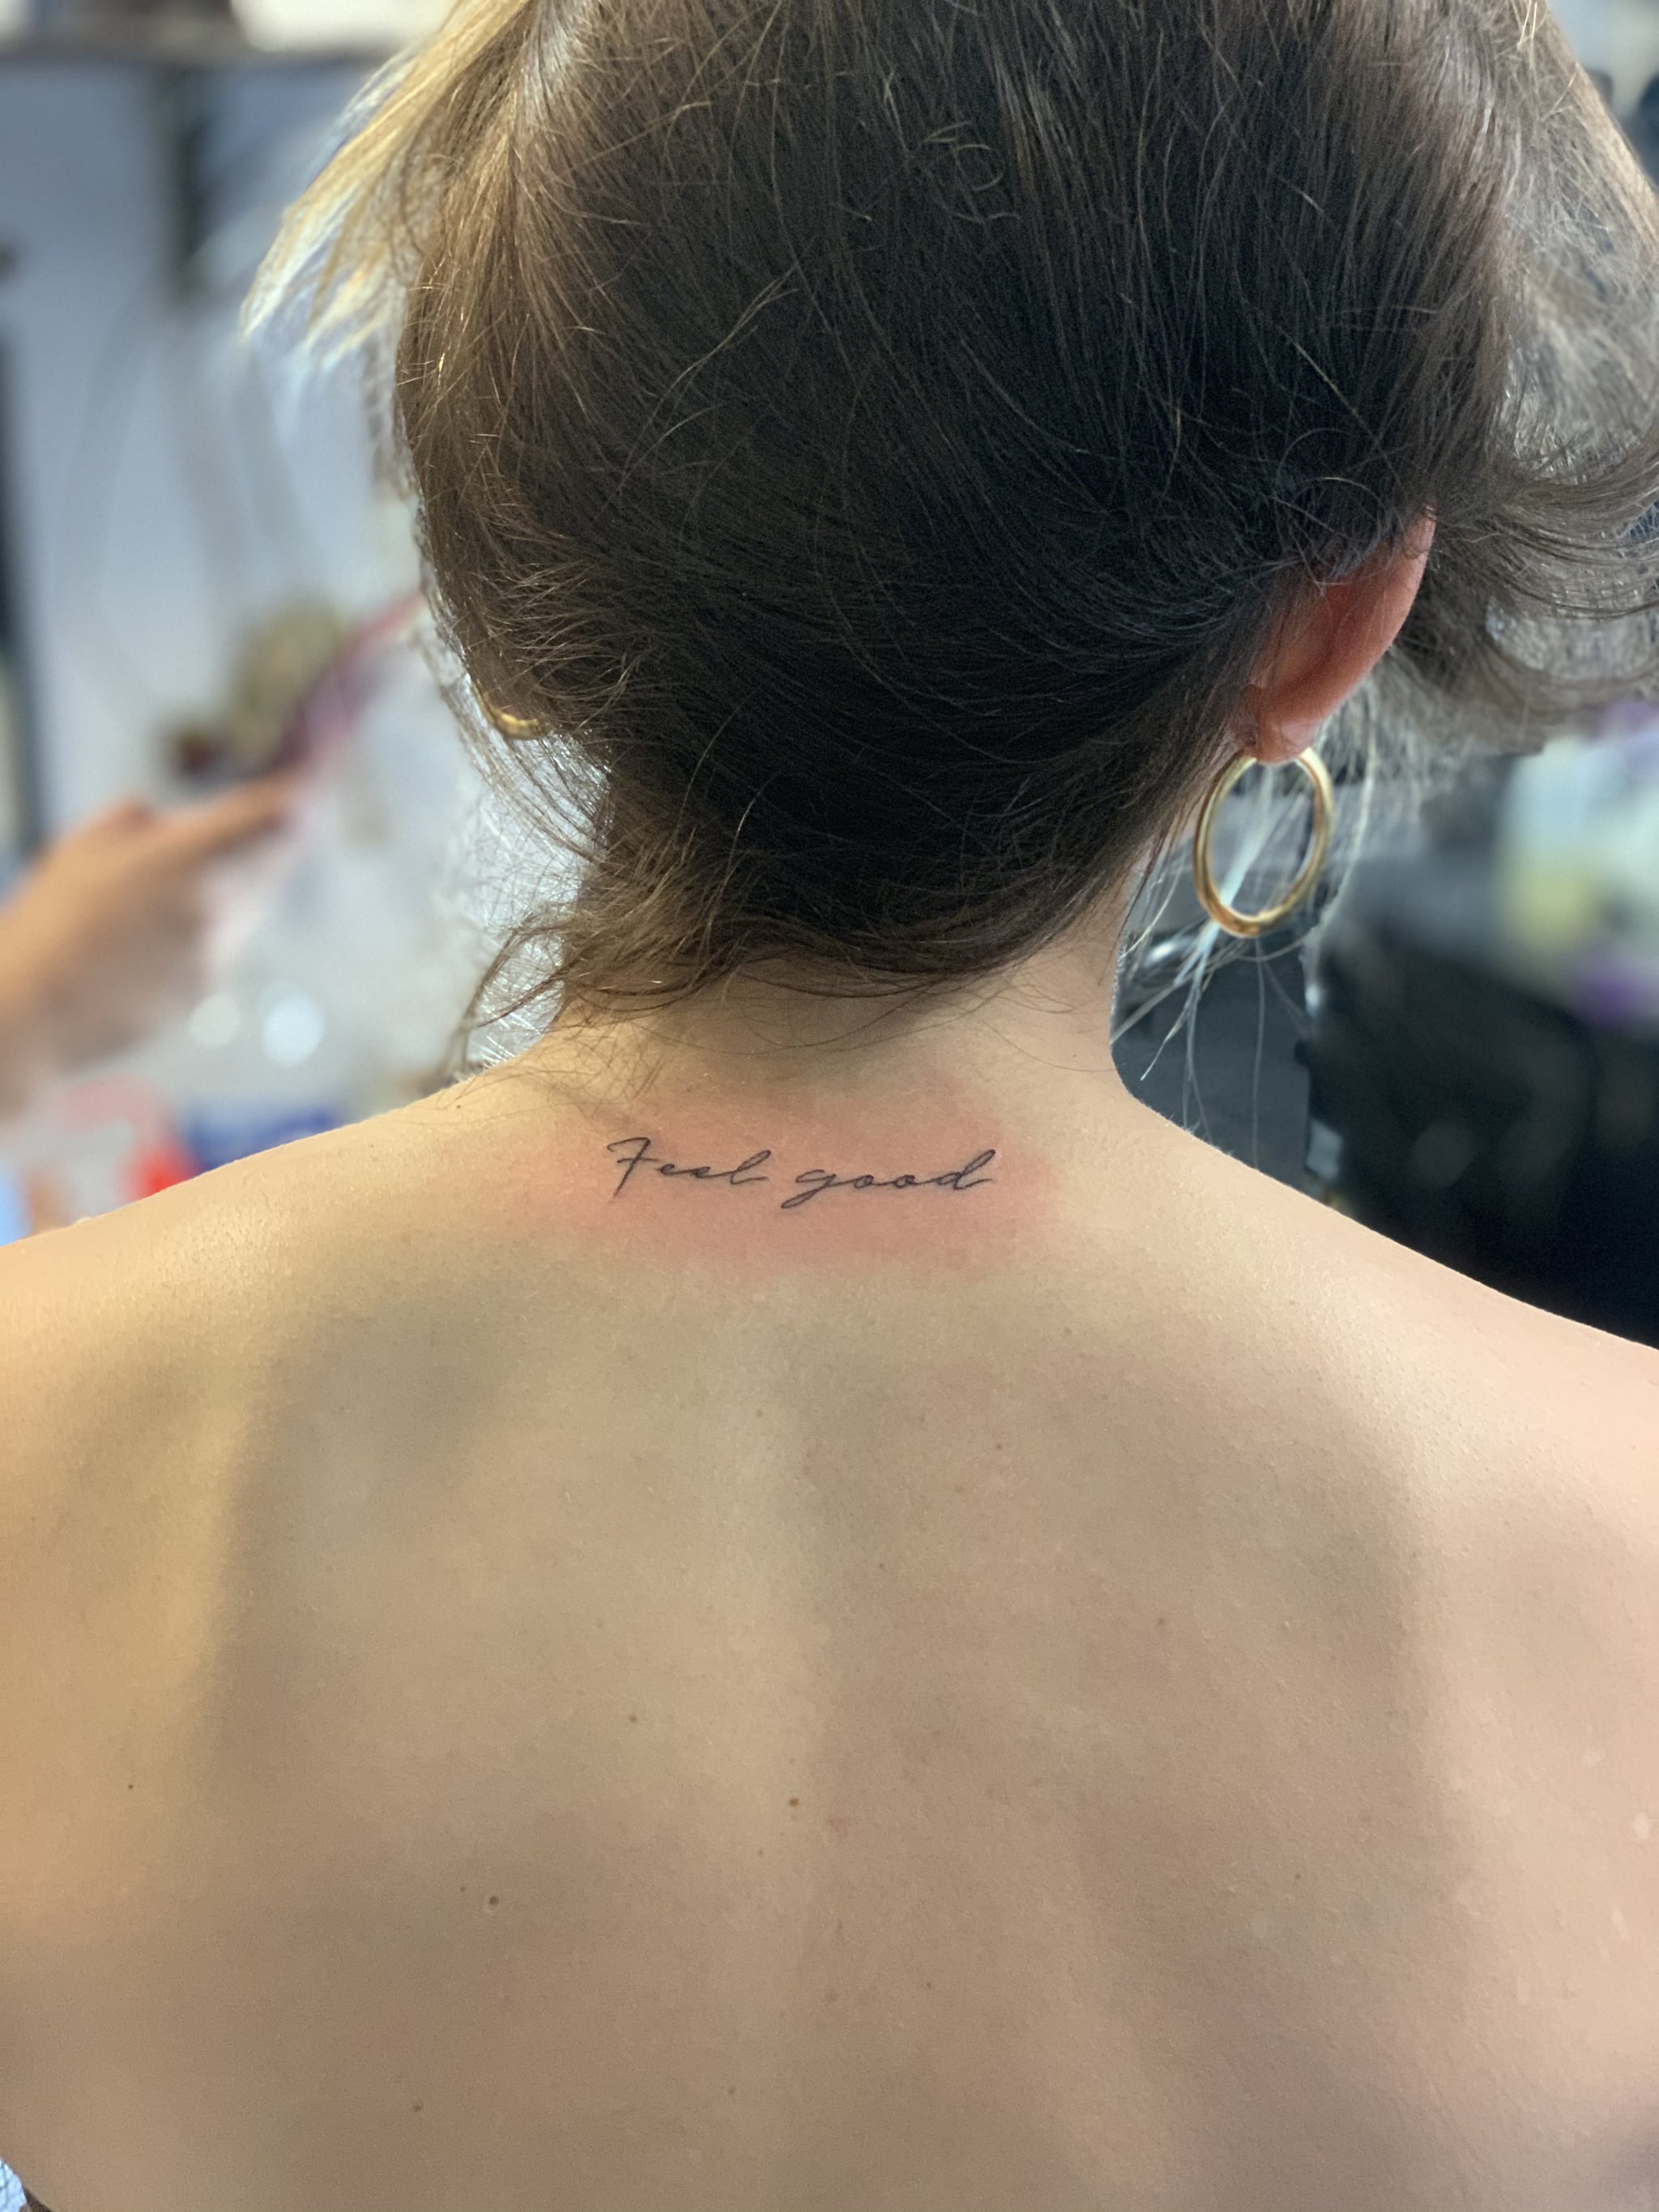 112 Energetic I Am Enough Tattoos To Fight Back Against Self Doubt